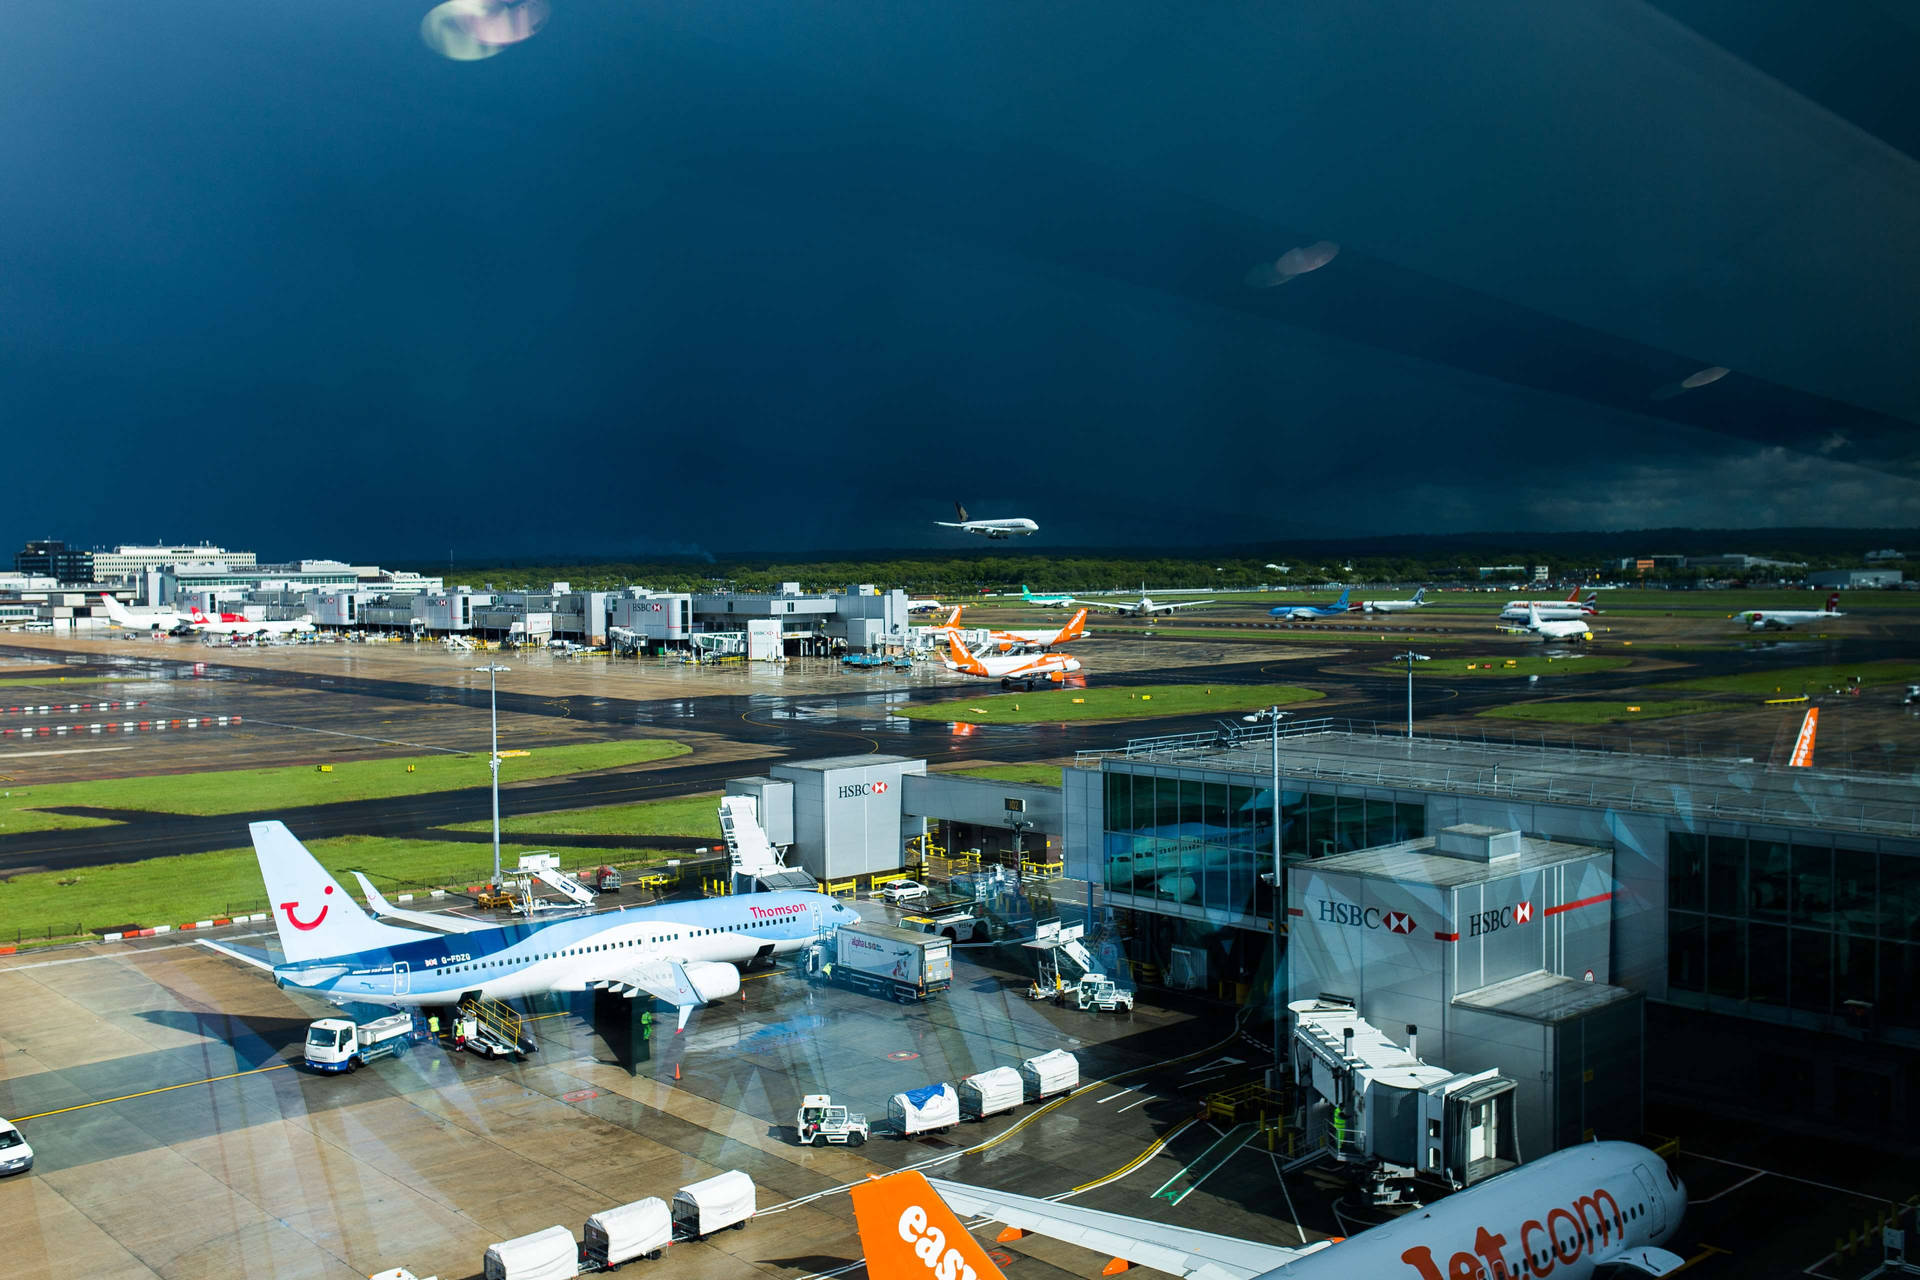 Bad Weather At The Airport Background